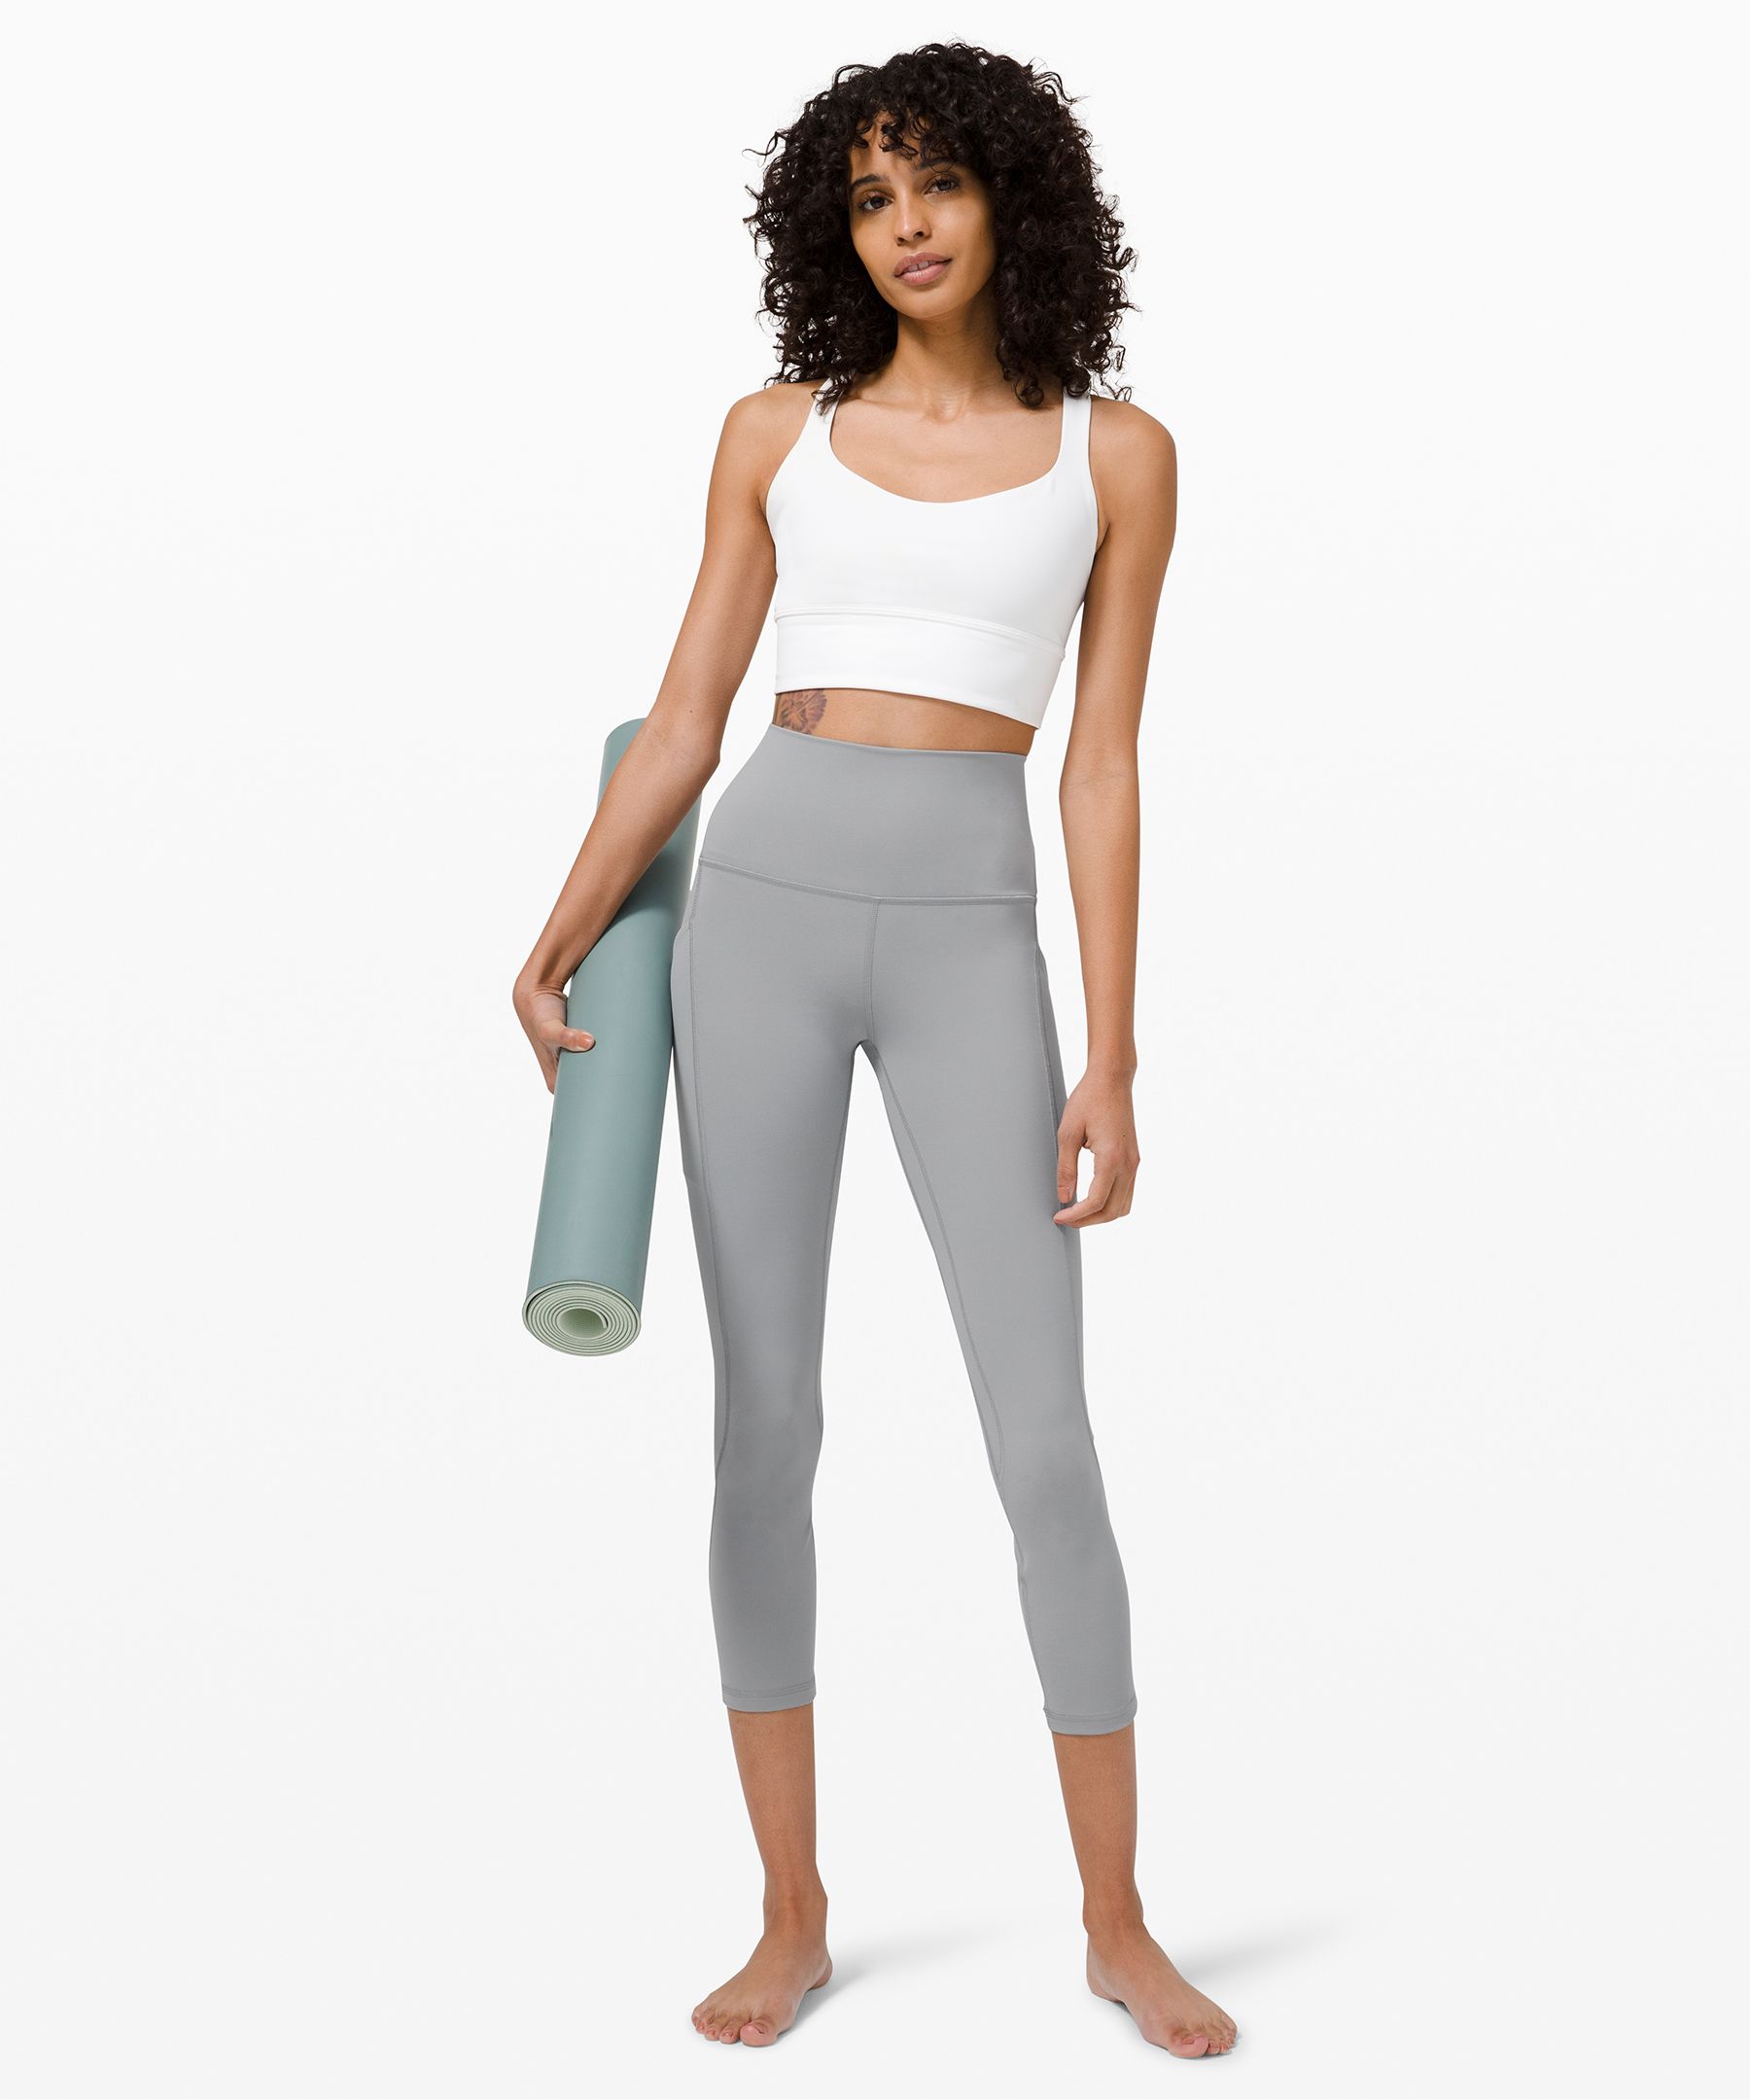 Do Lululemon Align Leggings Have Pockets? Let's Uncover The Facts - Playbite